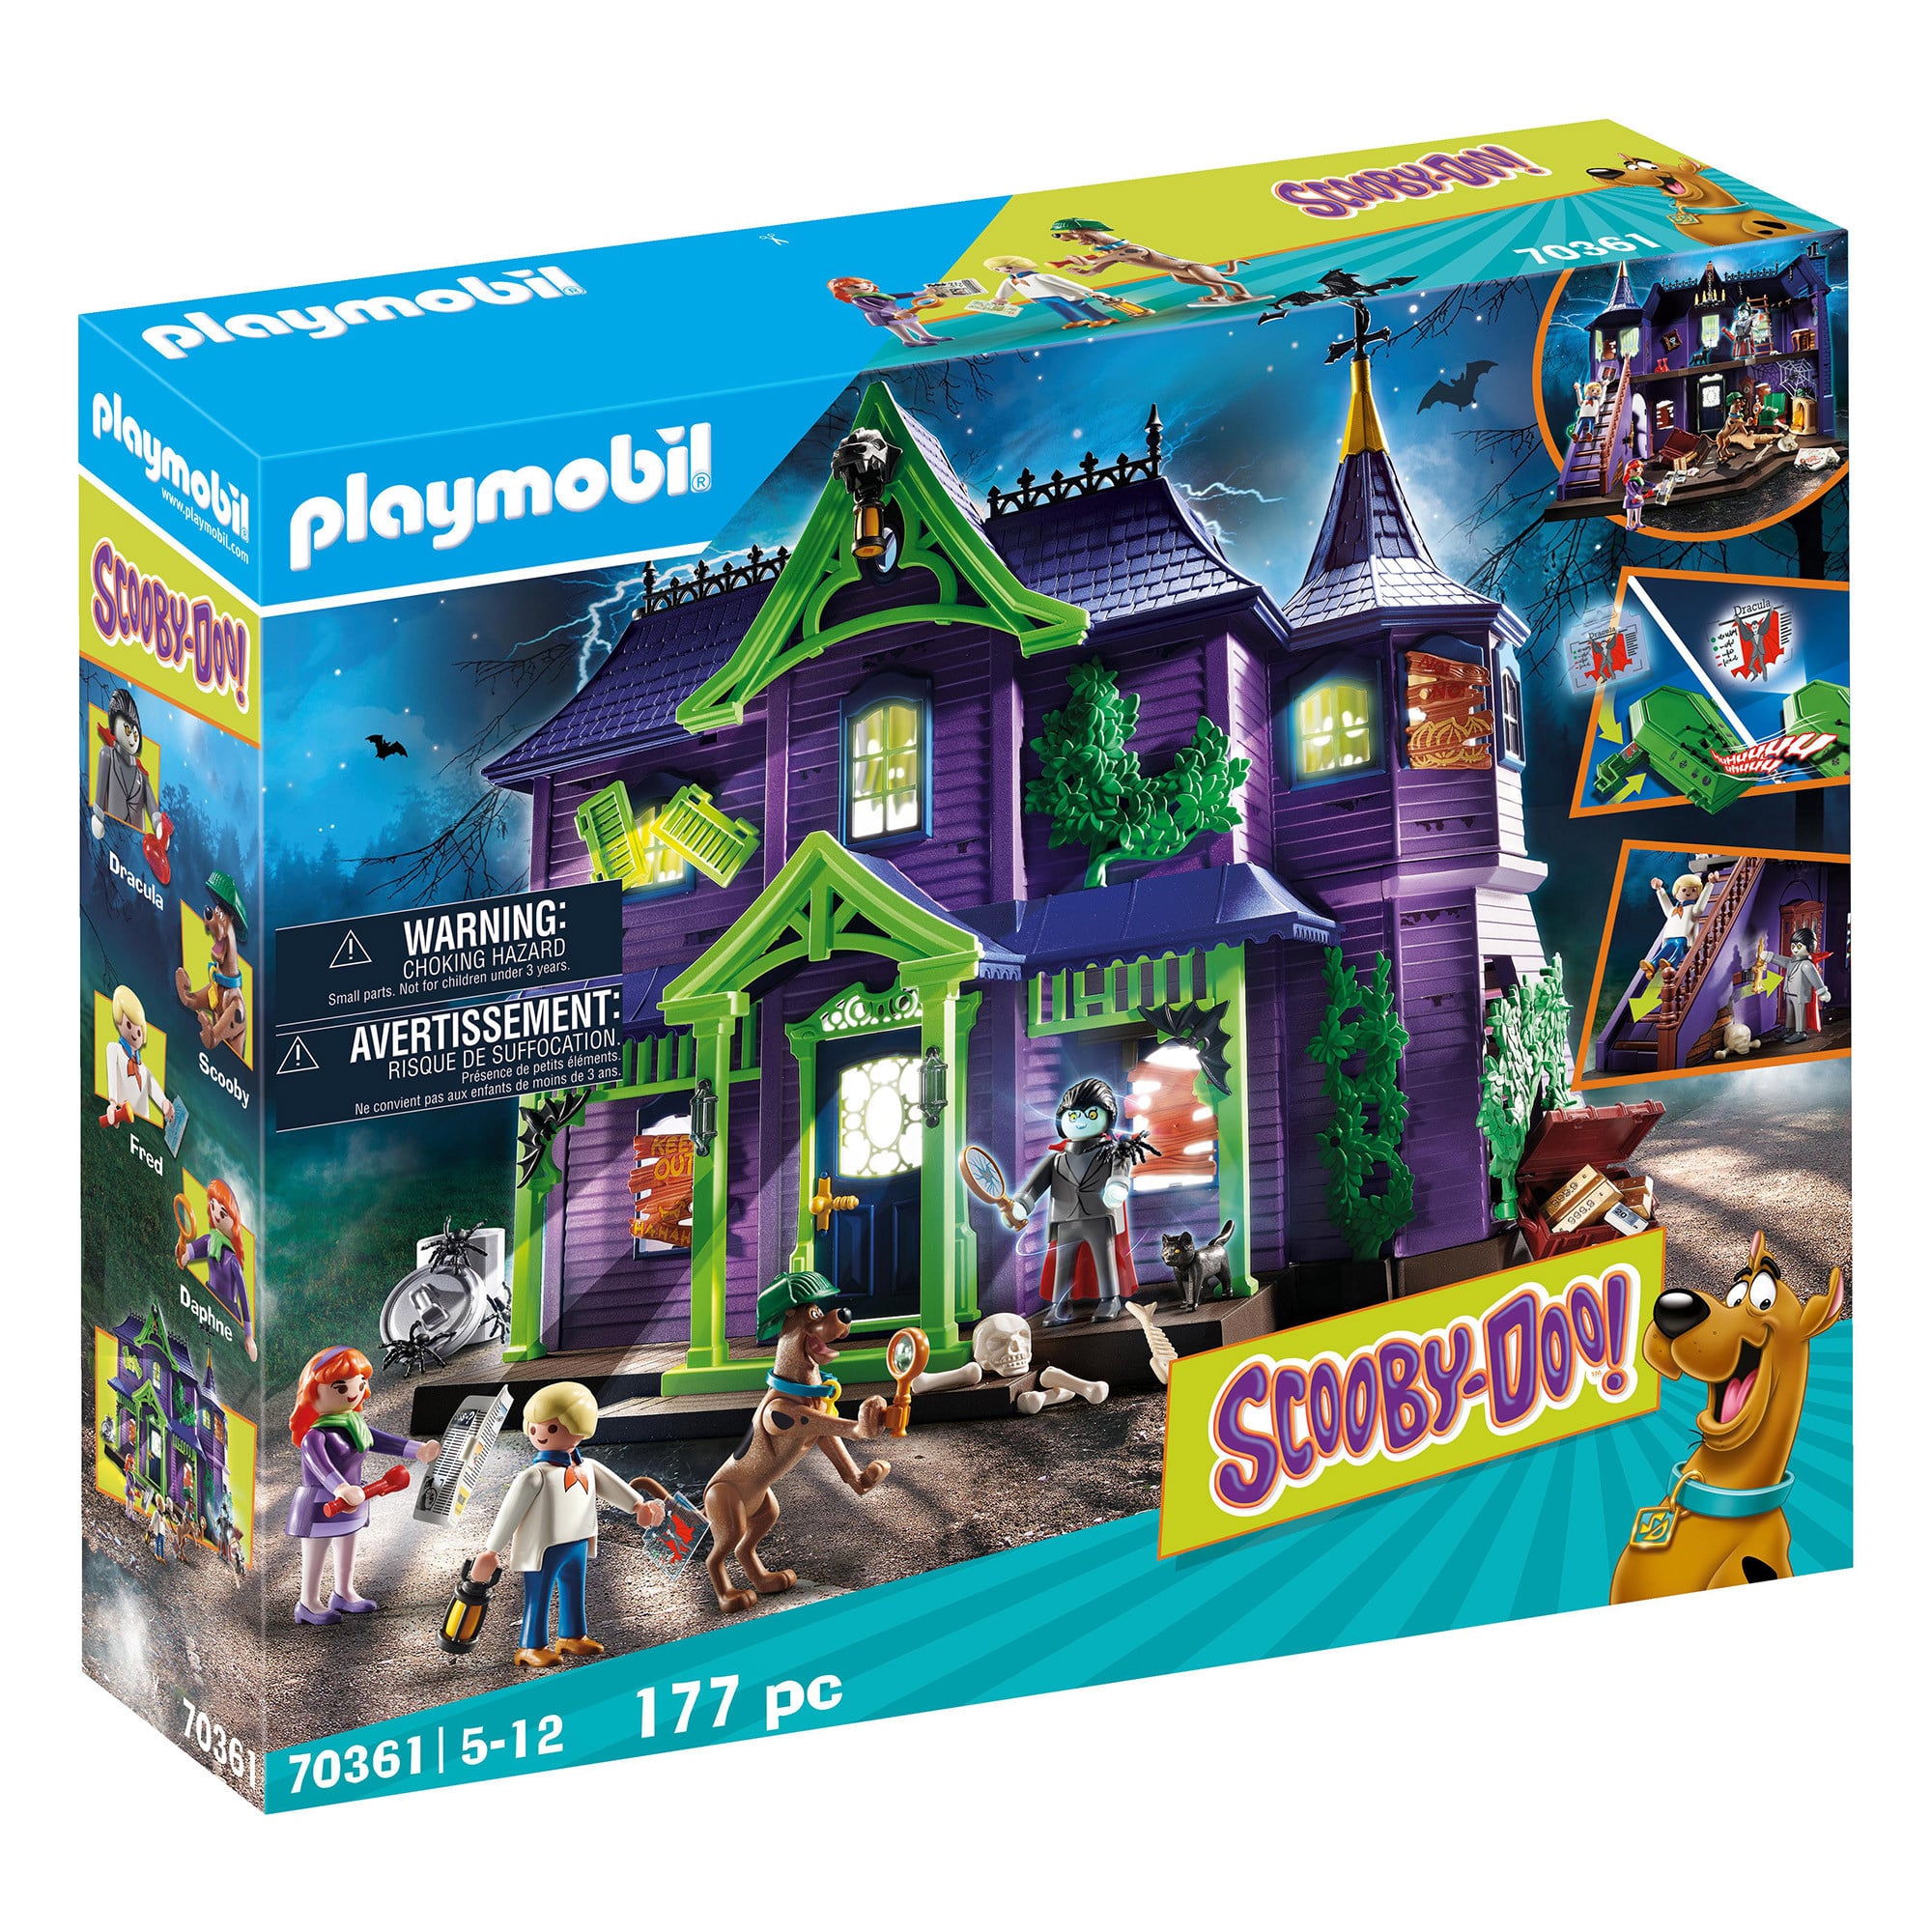 Playmobil - Scooby Doo! - Adventure in the Mystery Mansion 70361